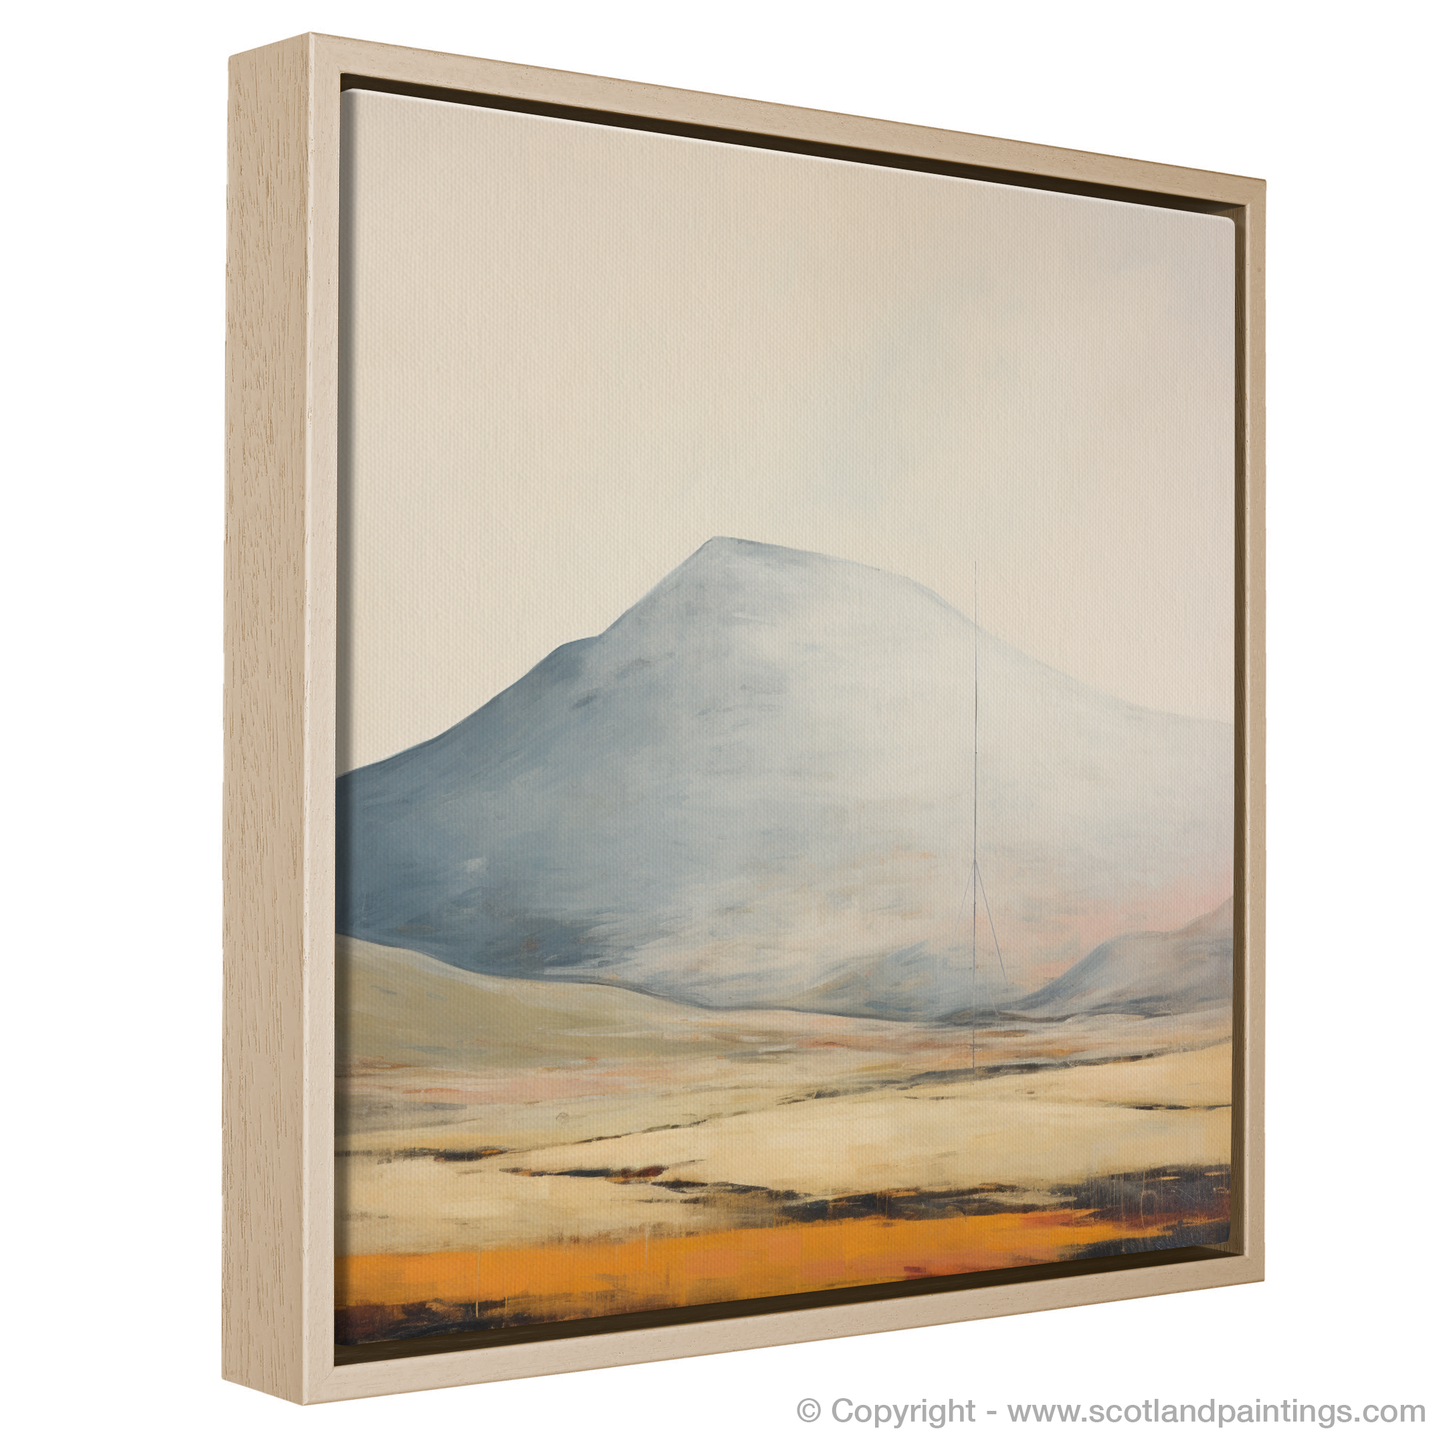 Painting and Art Print of The Cairnwell entitled "The Cairnwell Unveiled: An Abstract Highland Reverie".